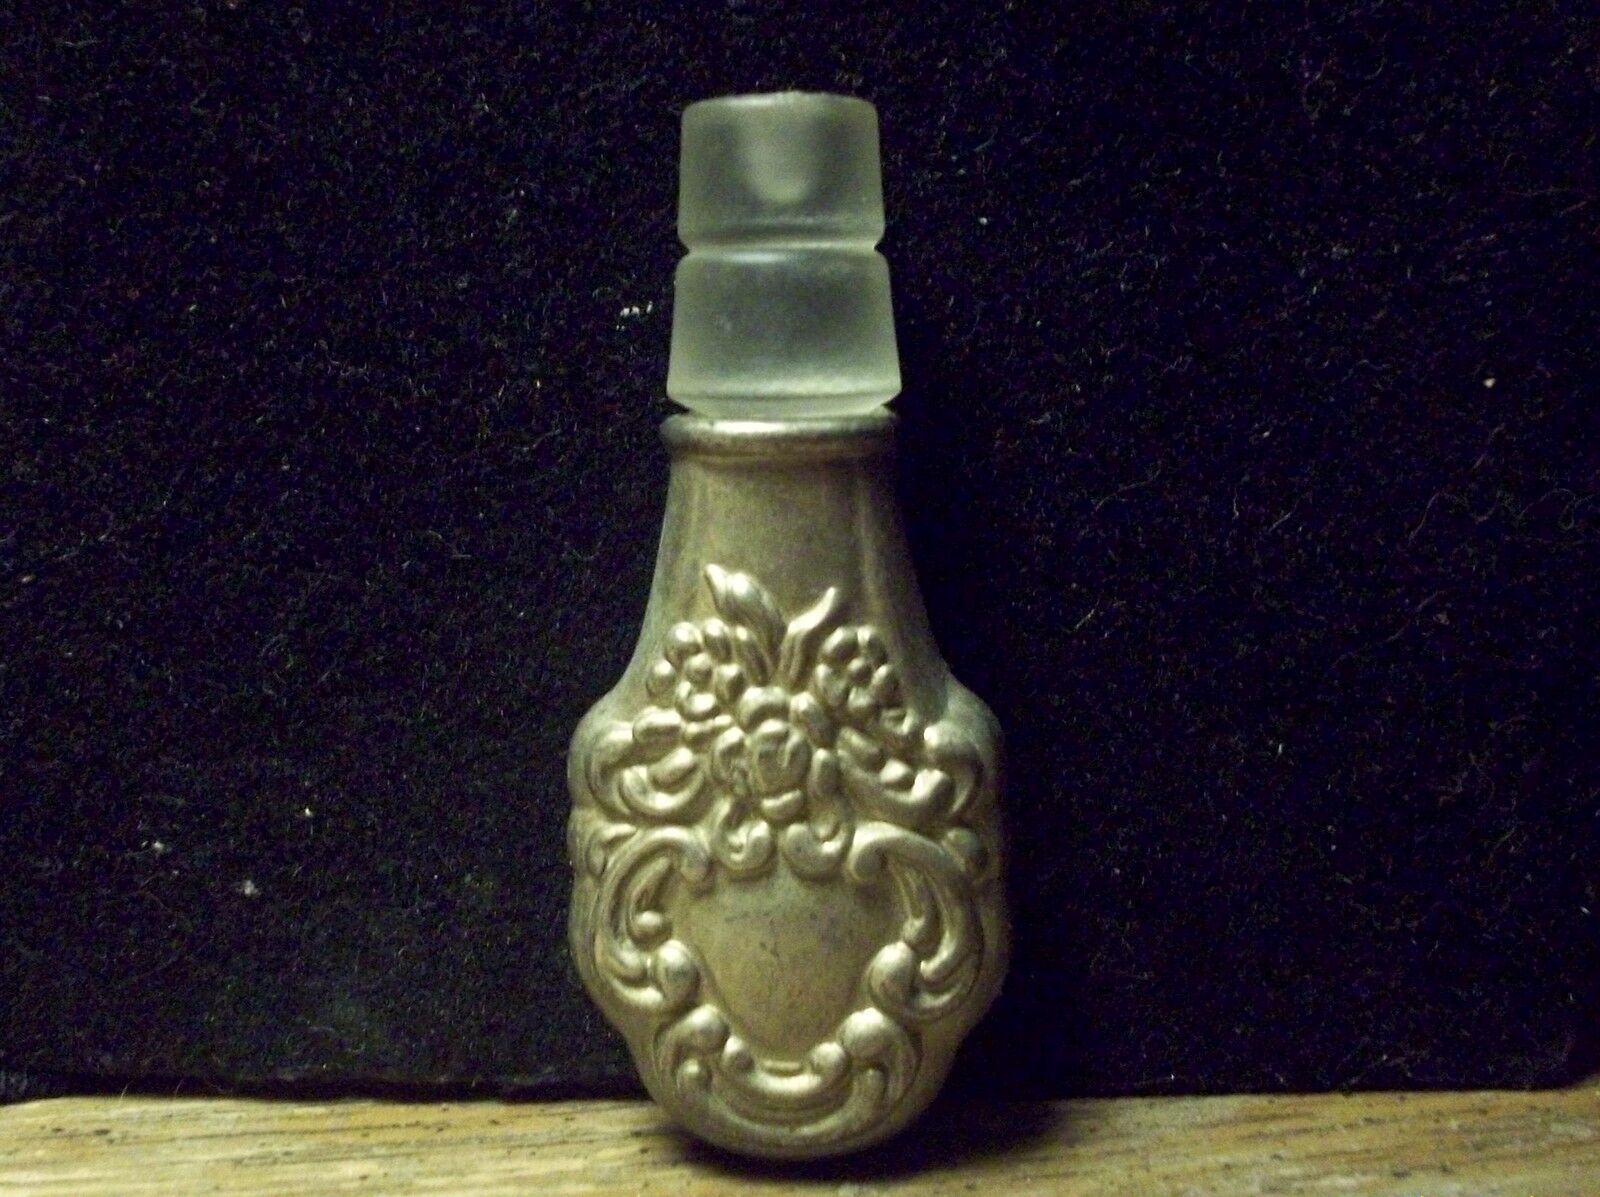 Vintage Antique? Silver Tone Small Ornate Flower Stopper To Decanter? Bottle?